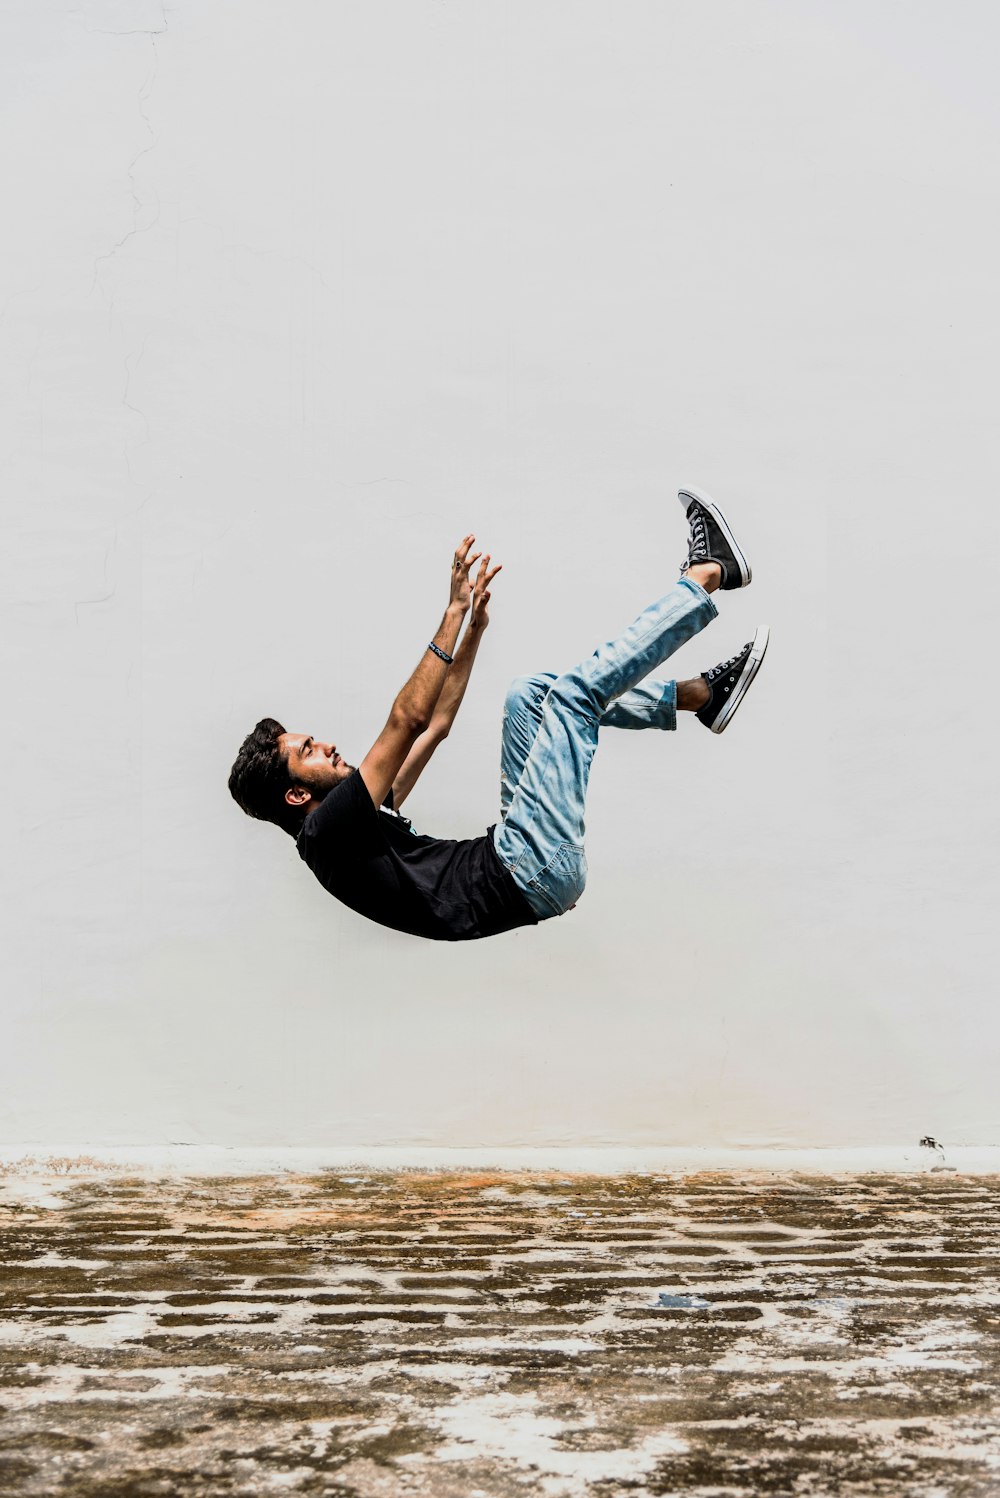 100+ Jumping Pictures  Download Free Images on Unsplash